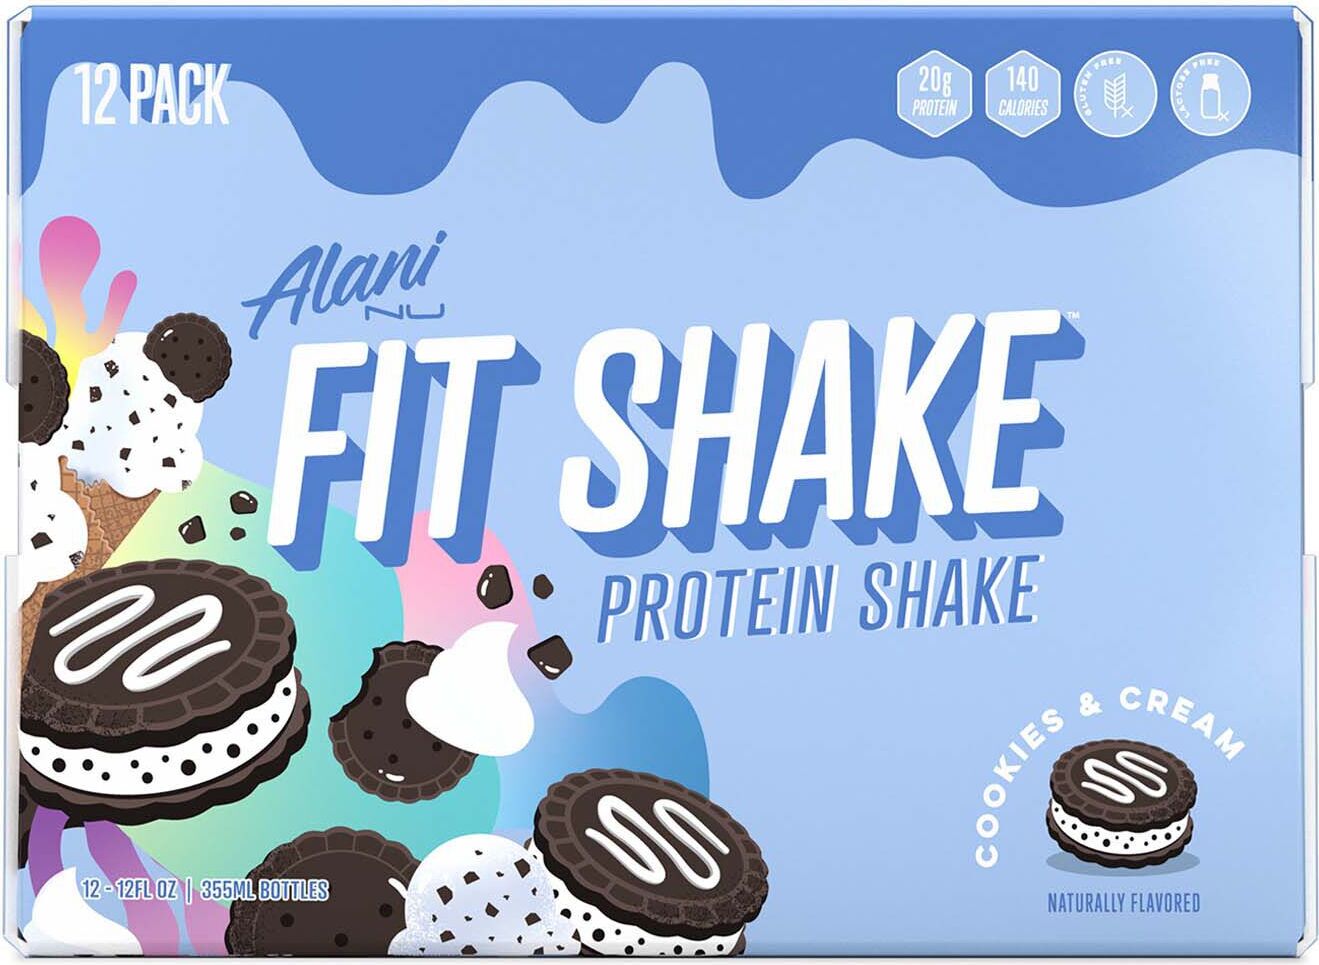 https://www.priceplow.com/static/images/products/alani-nu-fit-shake.jpg